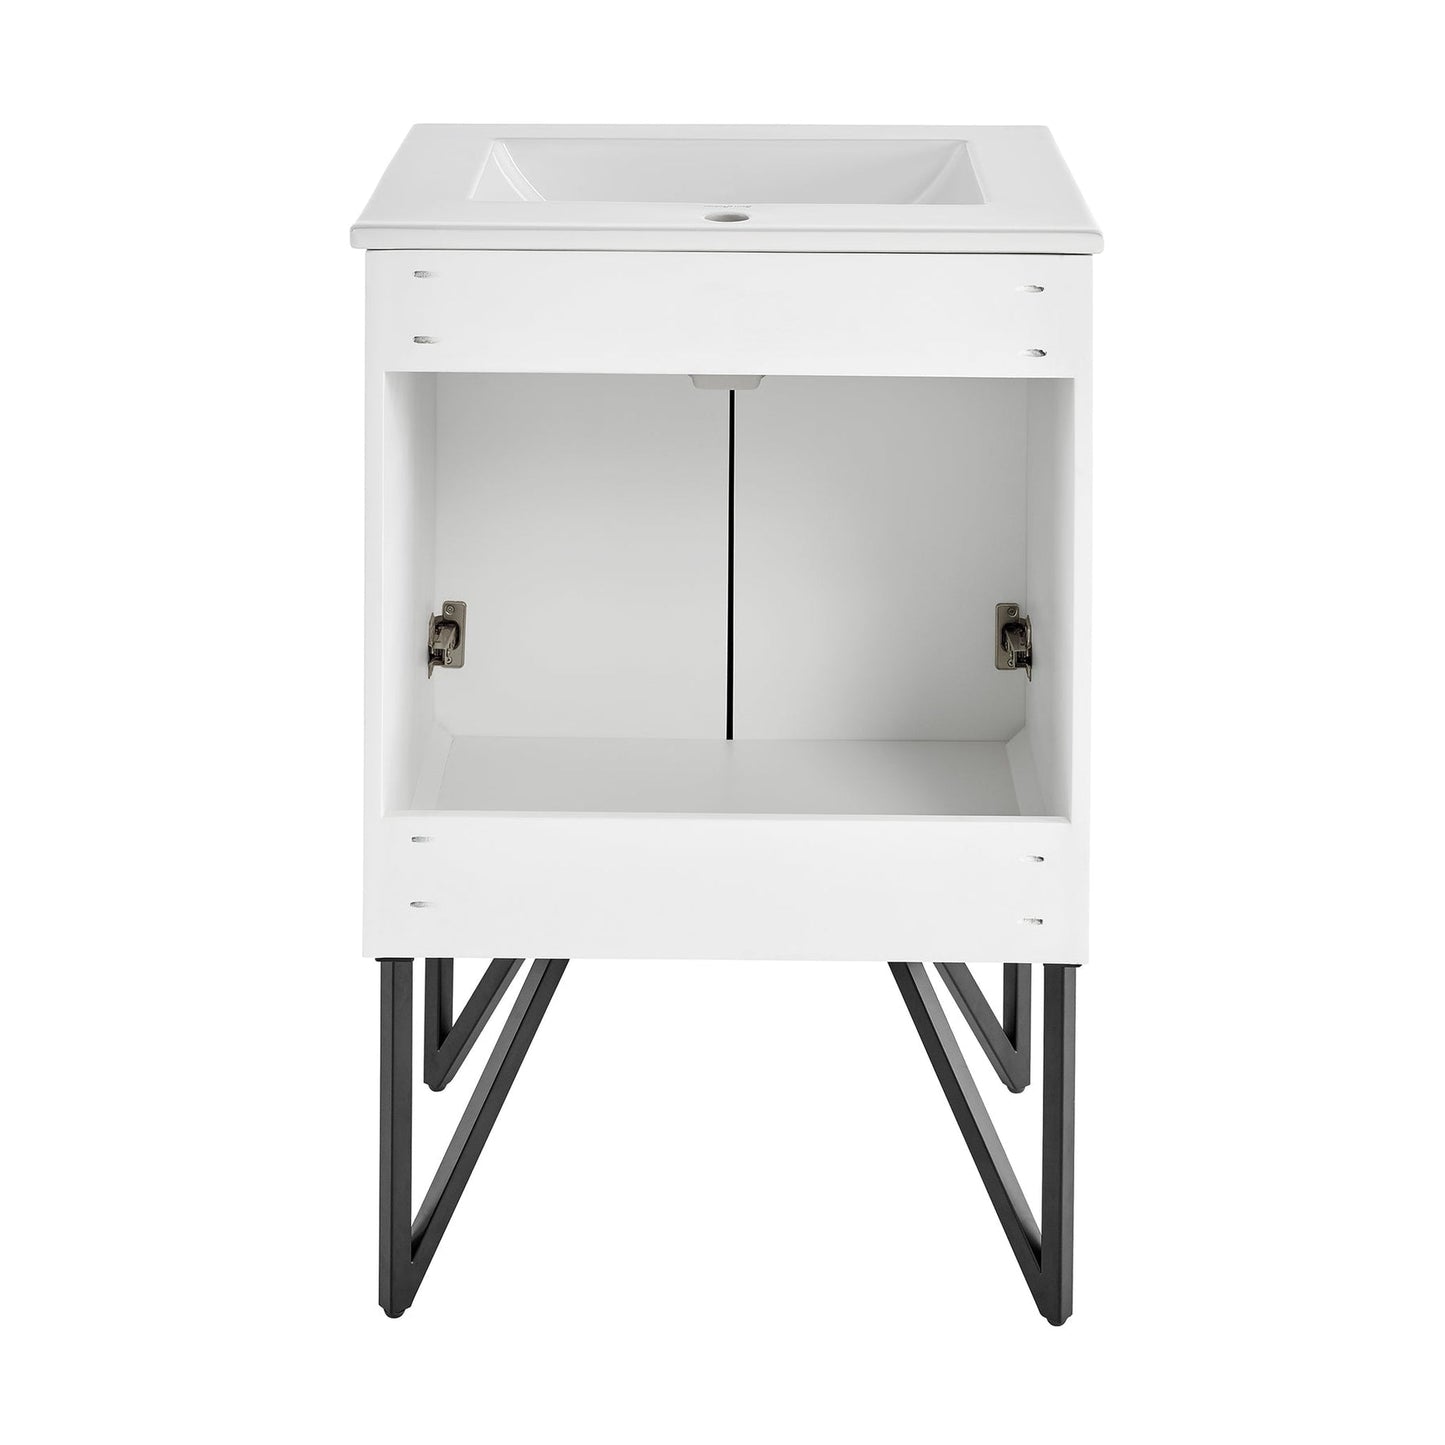 Swiss Madison Annecy 24" x 35" Freestanding Mondrian White Bathroom Vanity With Ceramic Single Sink and Stainless Steel Metal Legs